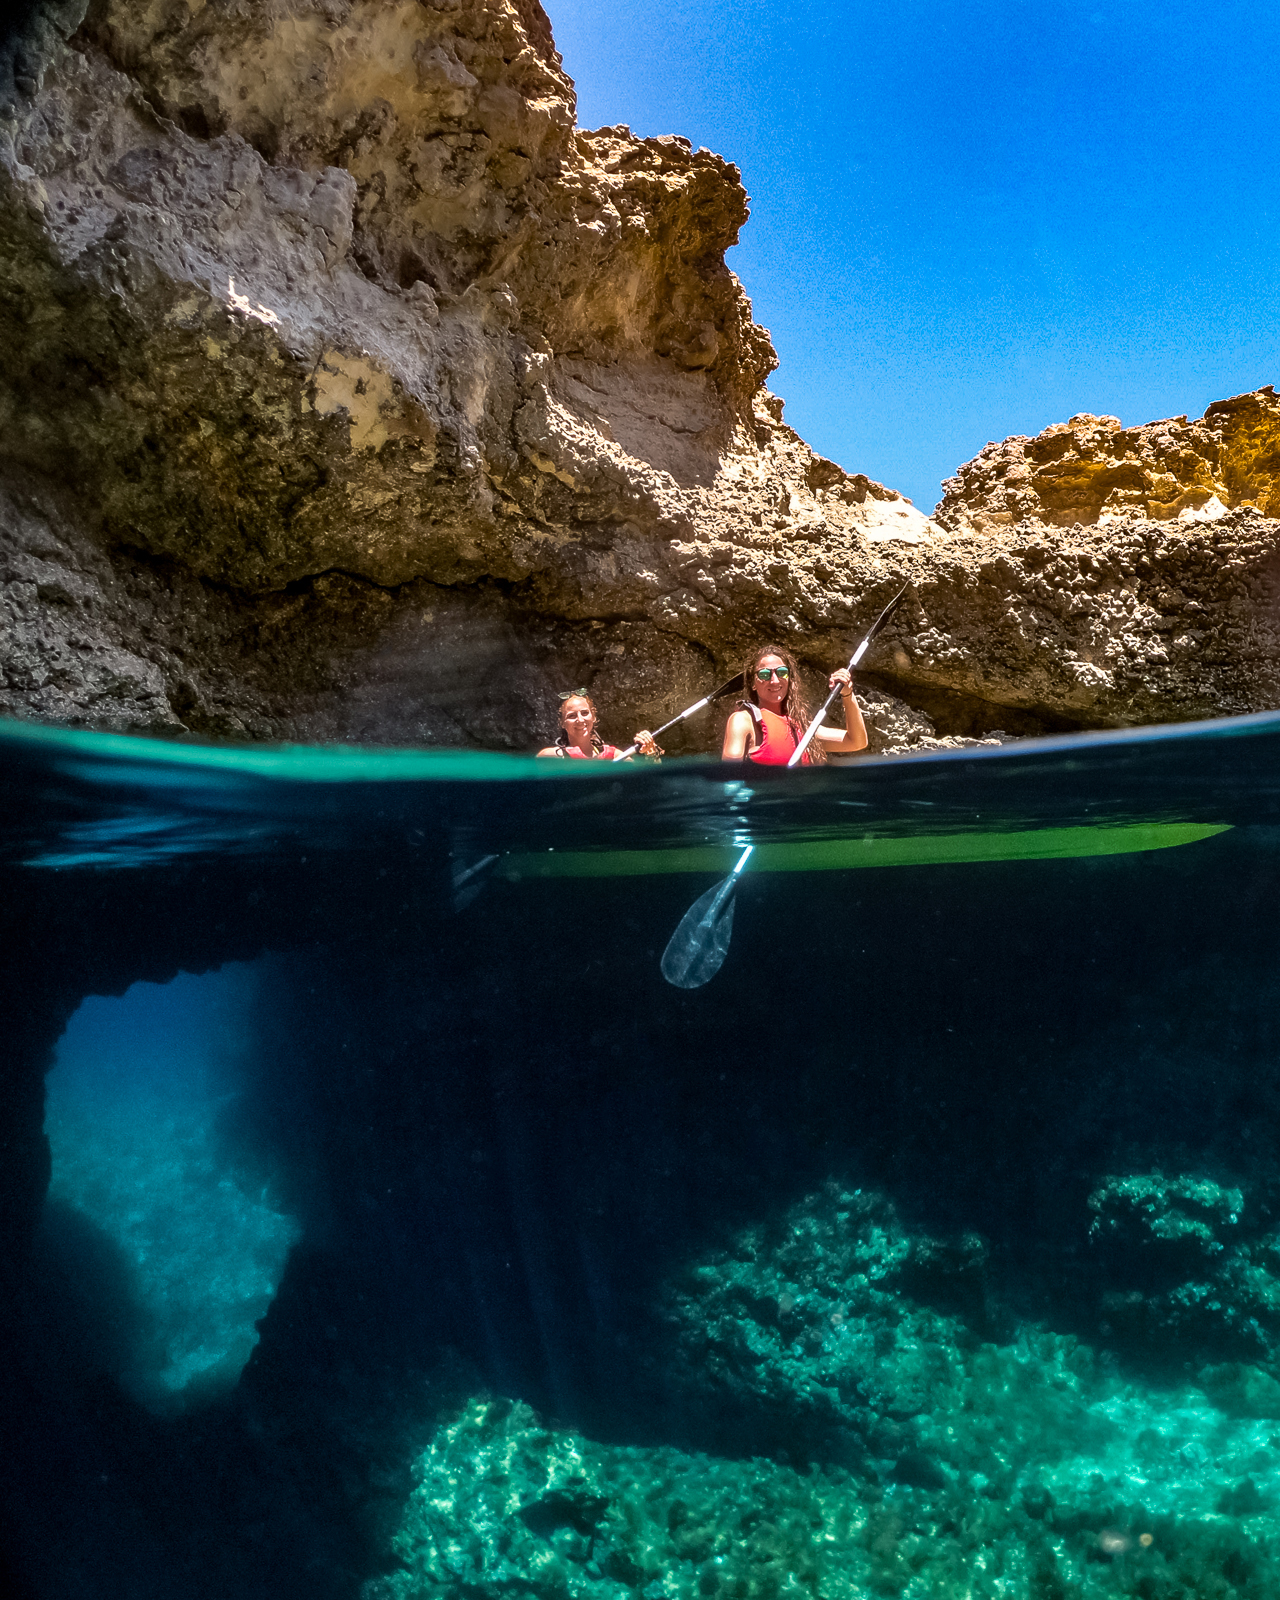 Underwater archway in Comino